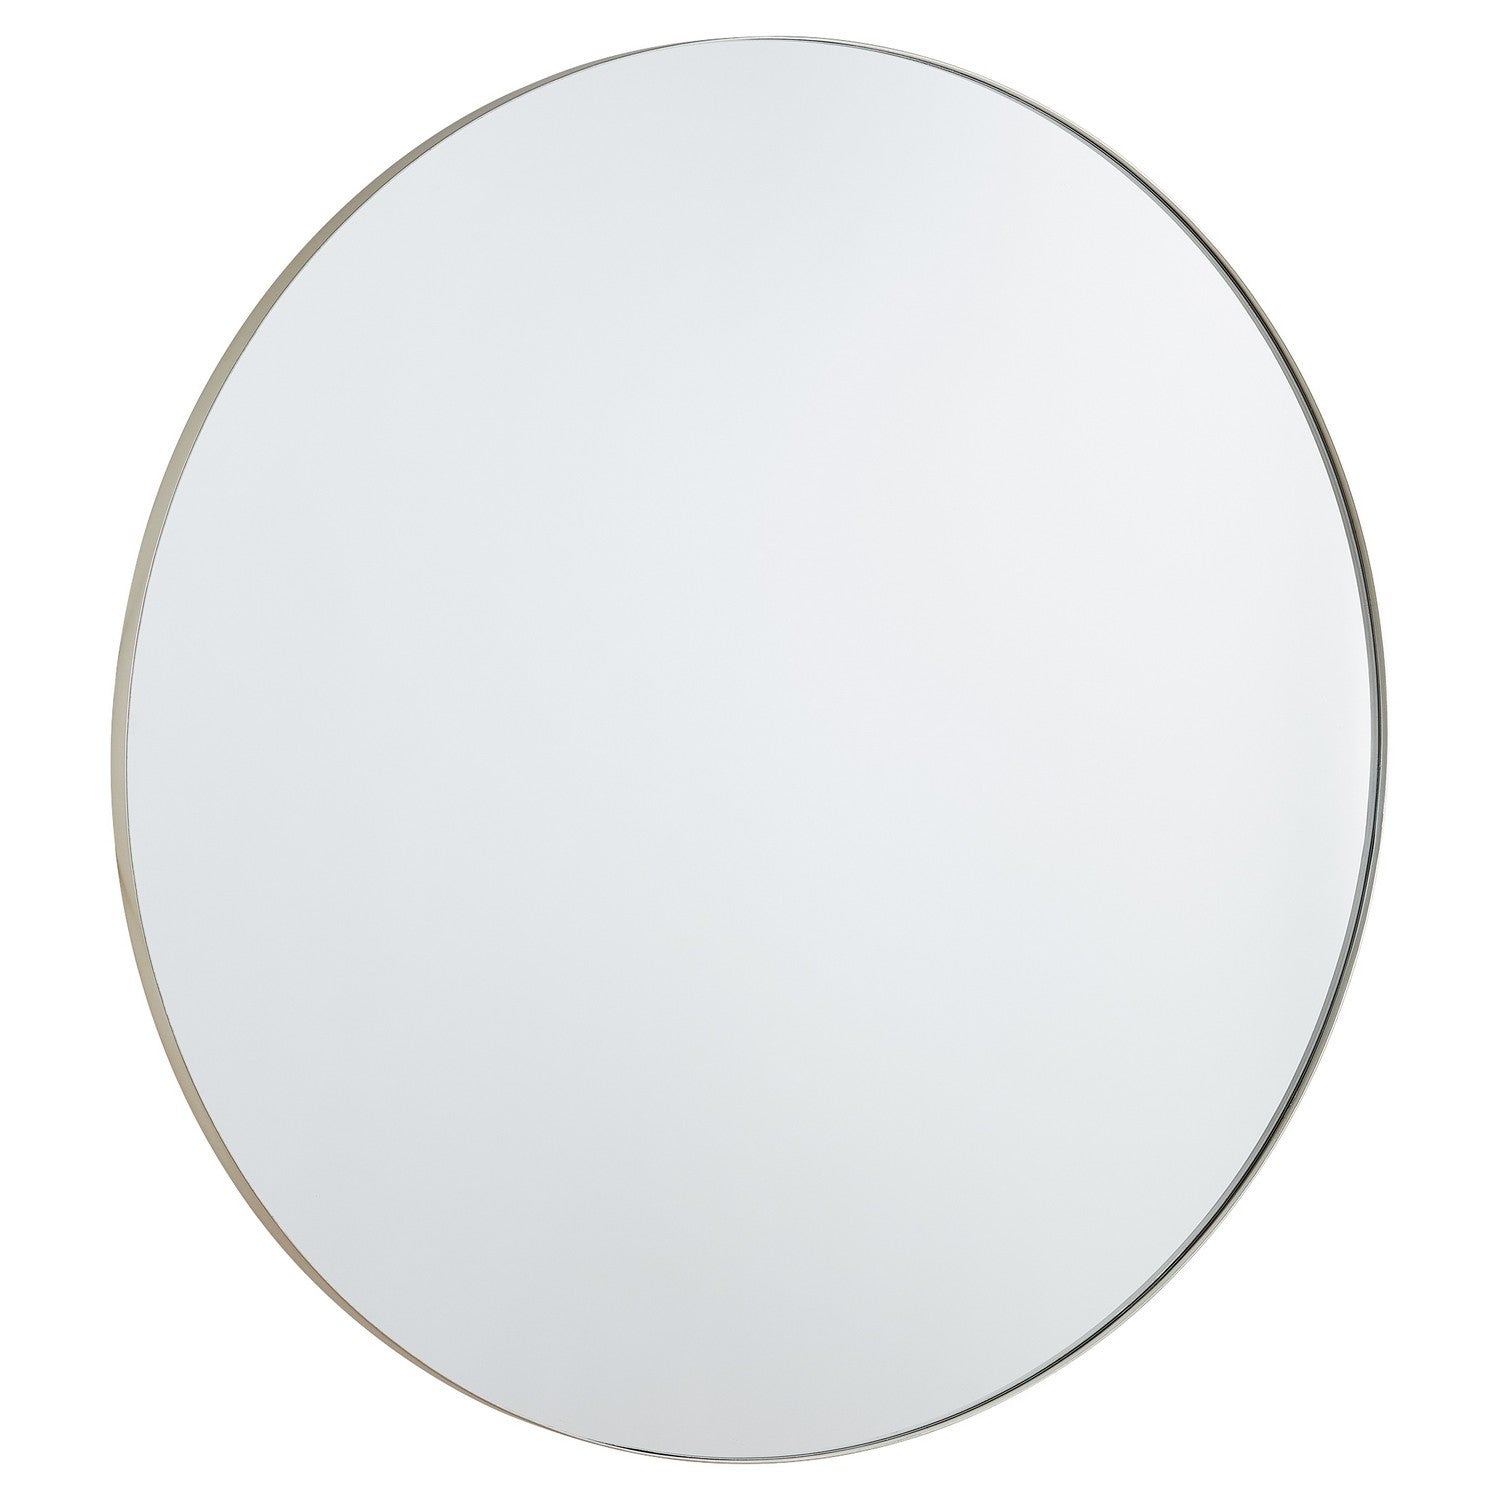 Quorum - 10-42-61 - Mirror - Round Mirrors - Silver Finished